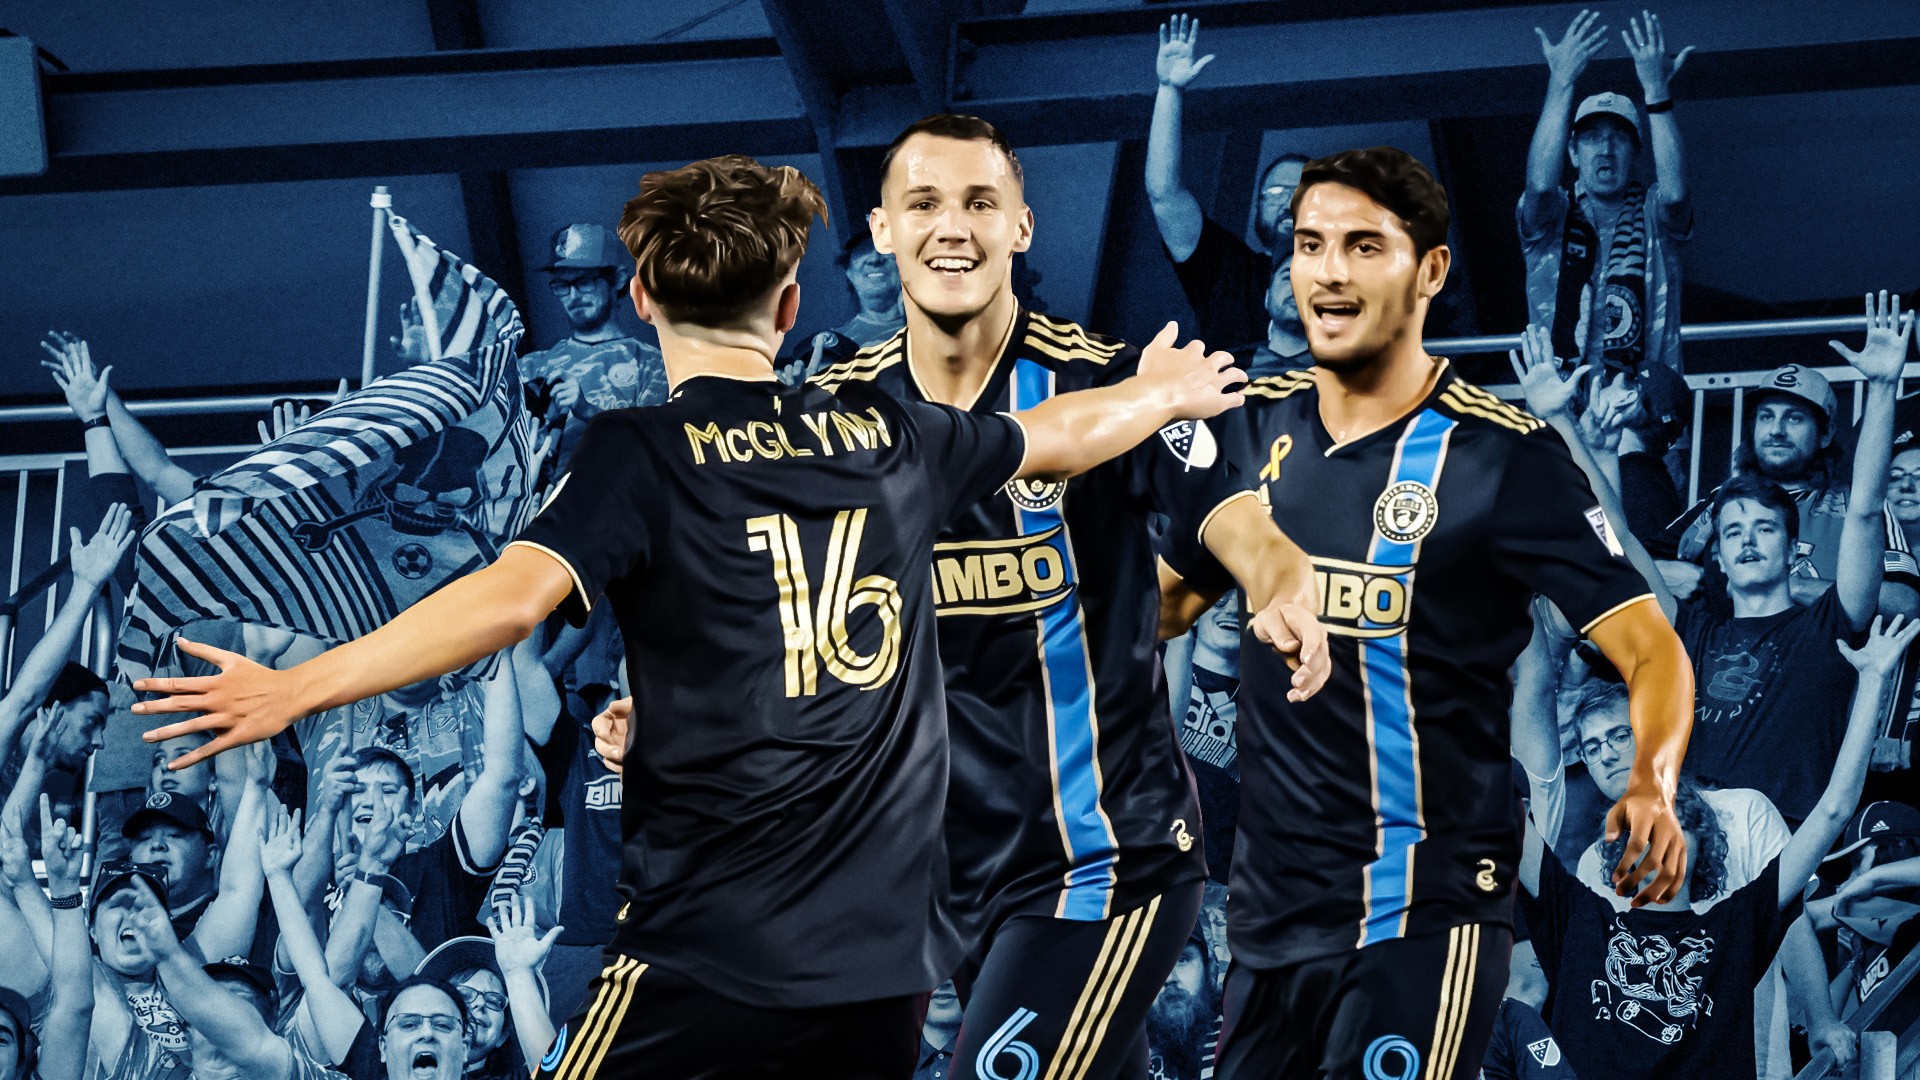 Philadelphia Union reign supreme: “Our supporters outnumbered” New York Red Bulls